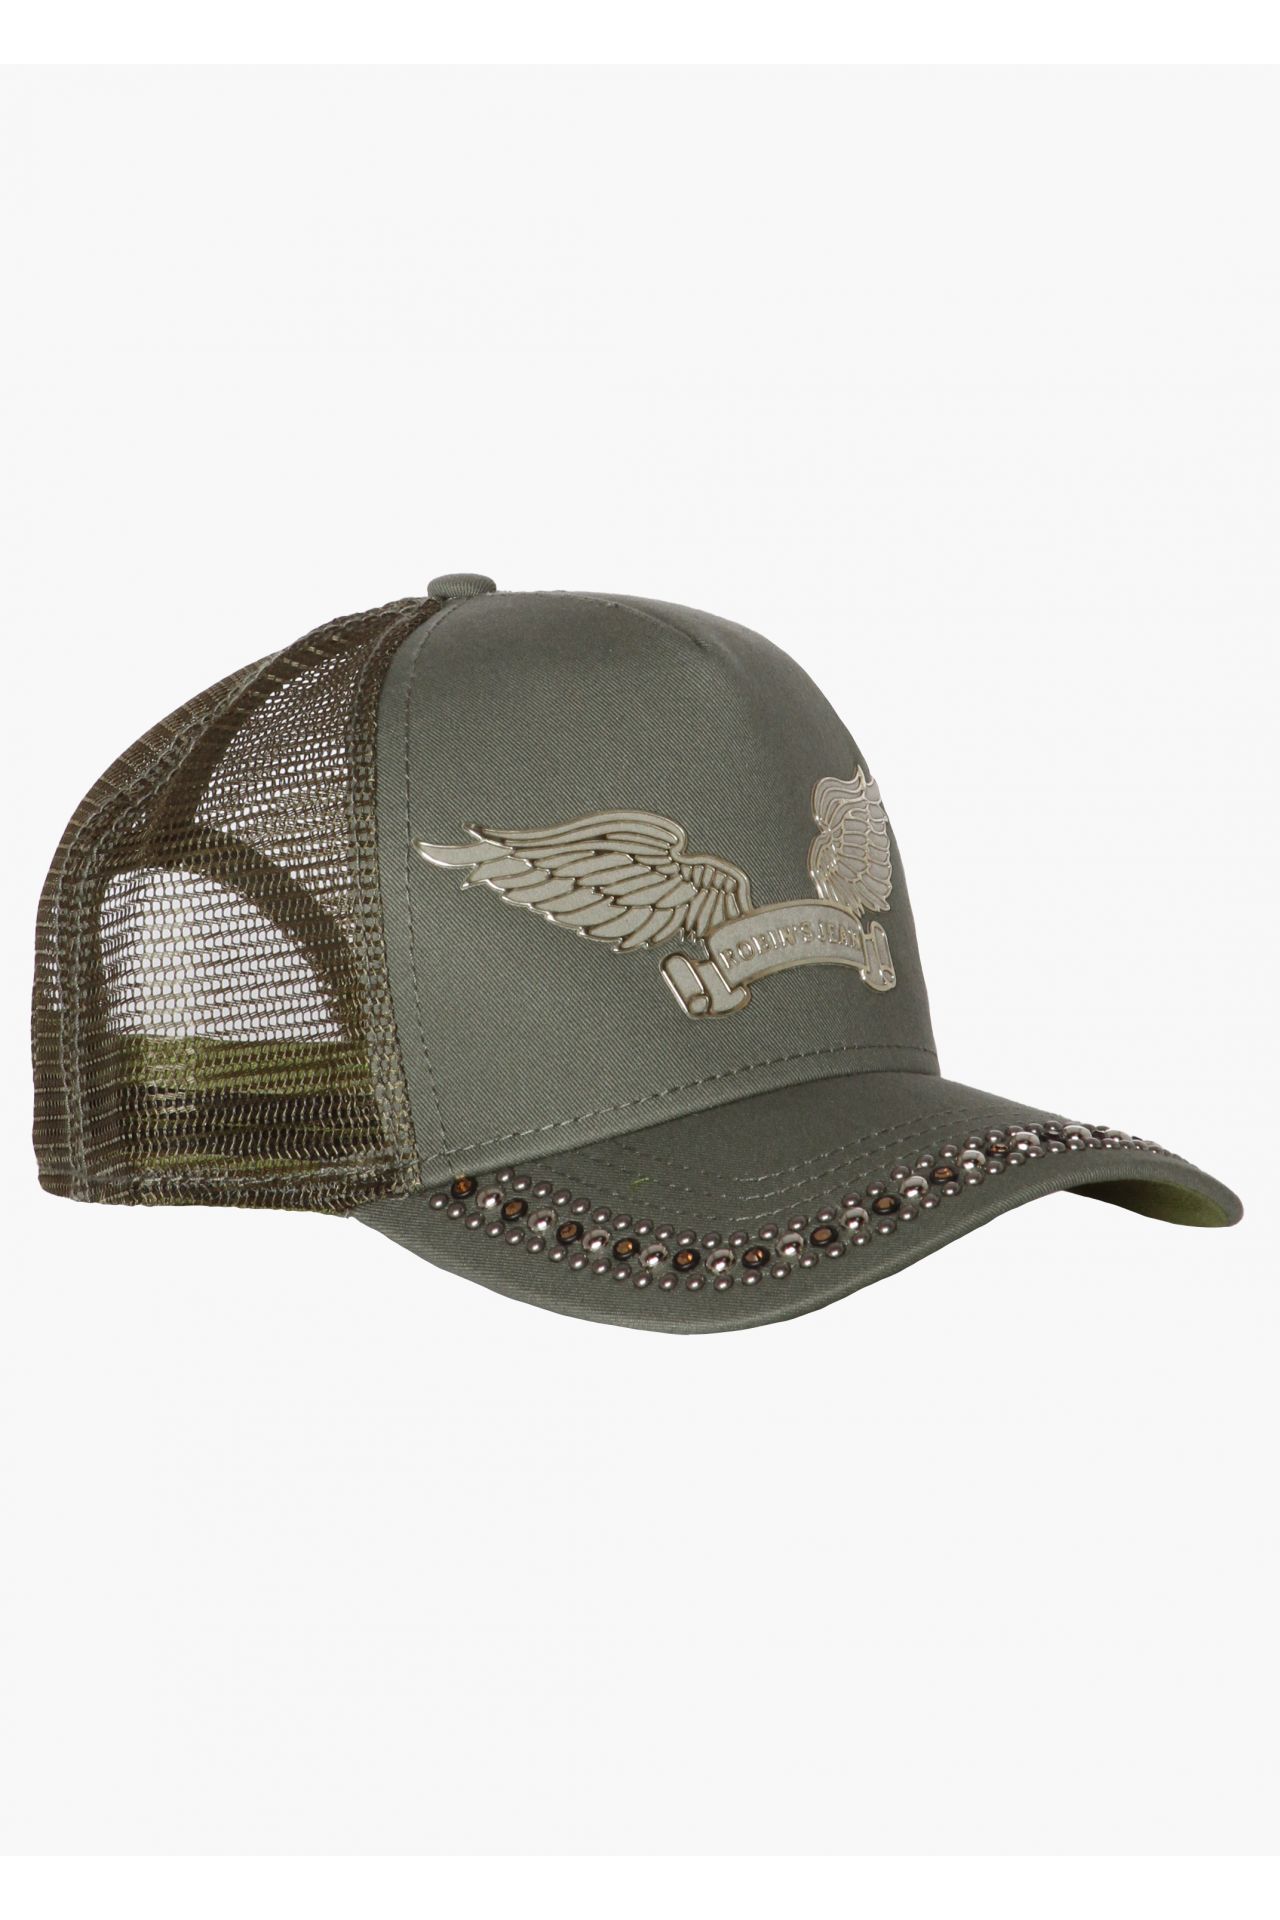 TRUCKER CAP IN OLIVE WITH CRYSTALS